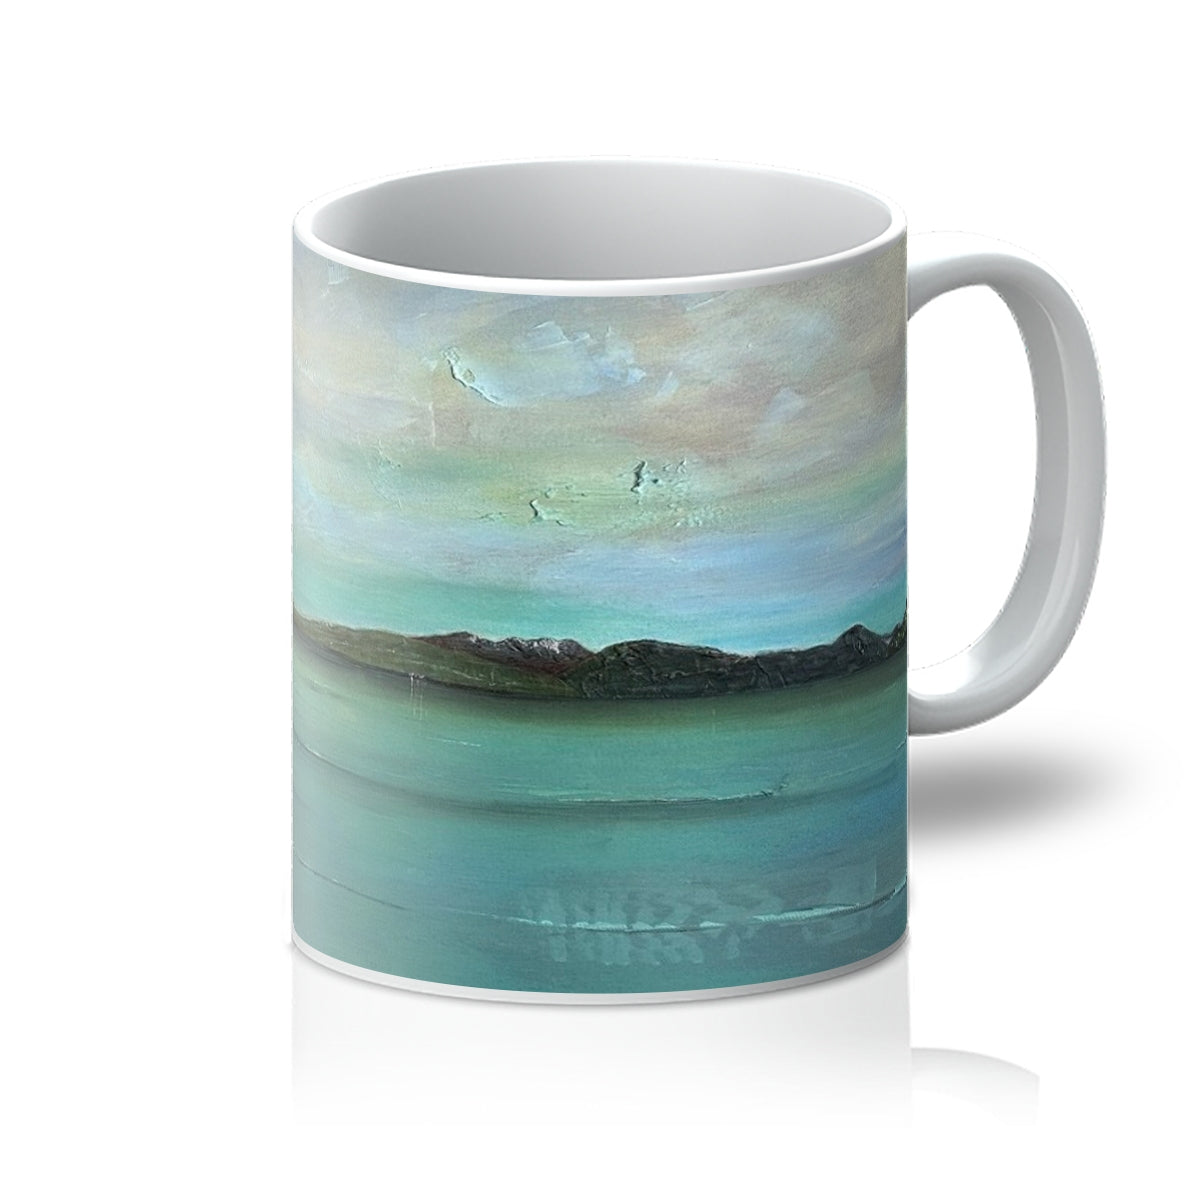 An Ethereal Loch Lomond Art Gifts Mug-Homeware-Scottish Lochs & Mountains Art Gallery-11oz-White-Paintings, Prints, Homeware, Art Gifts From Scotland By Scottish Artist Kevin Hunter